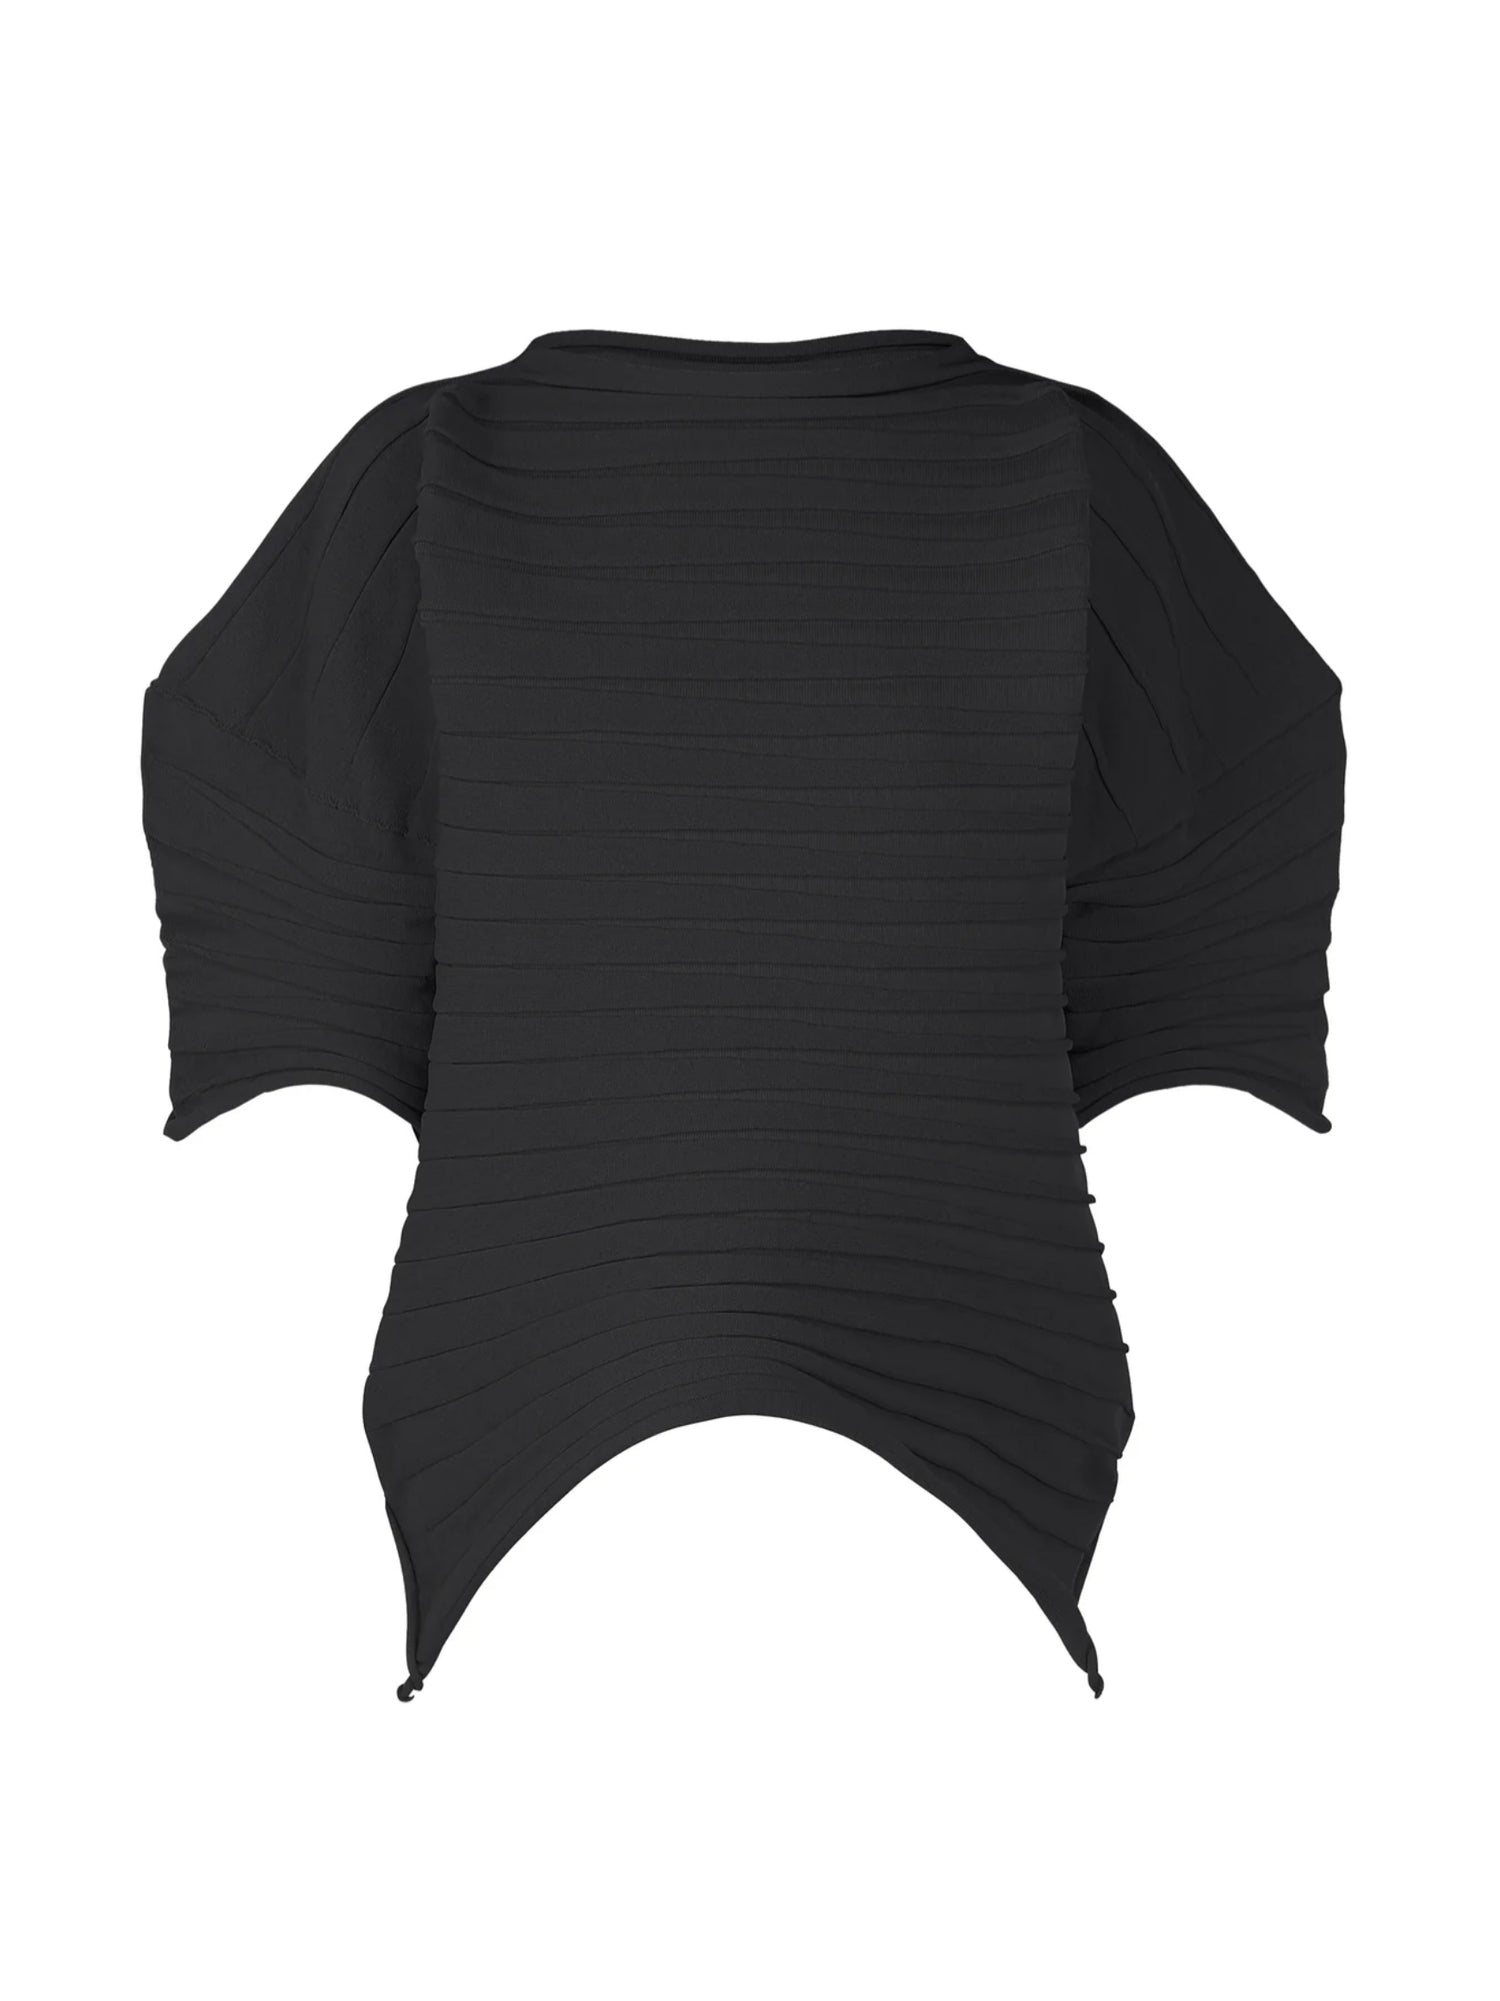 Short-sleeved knitted top, black